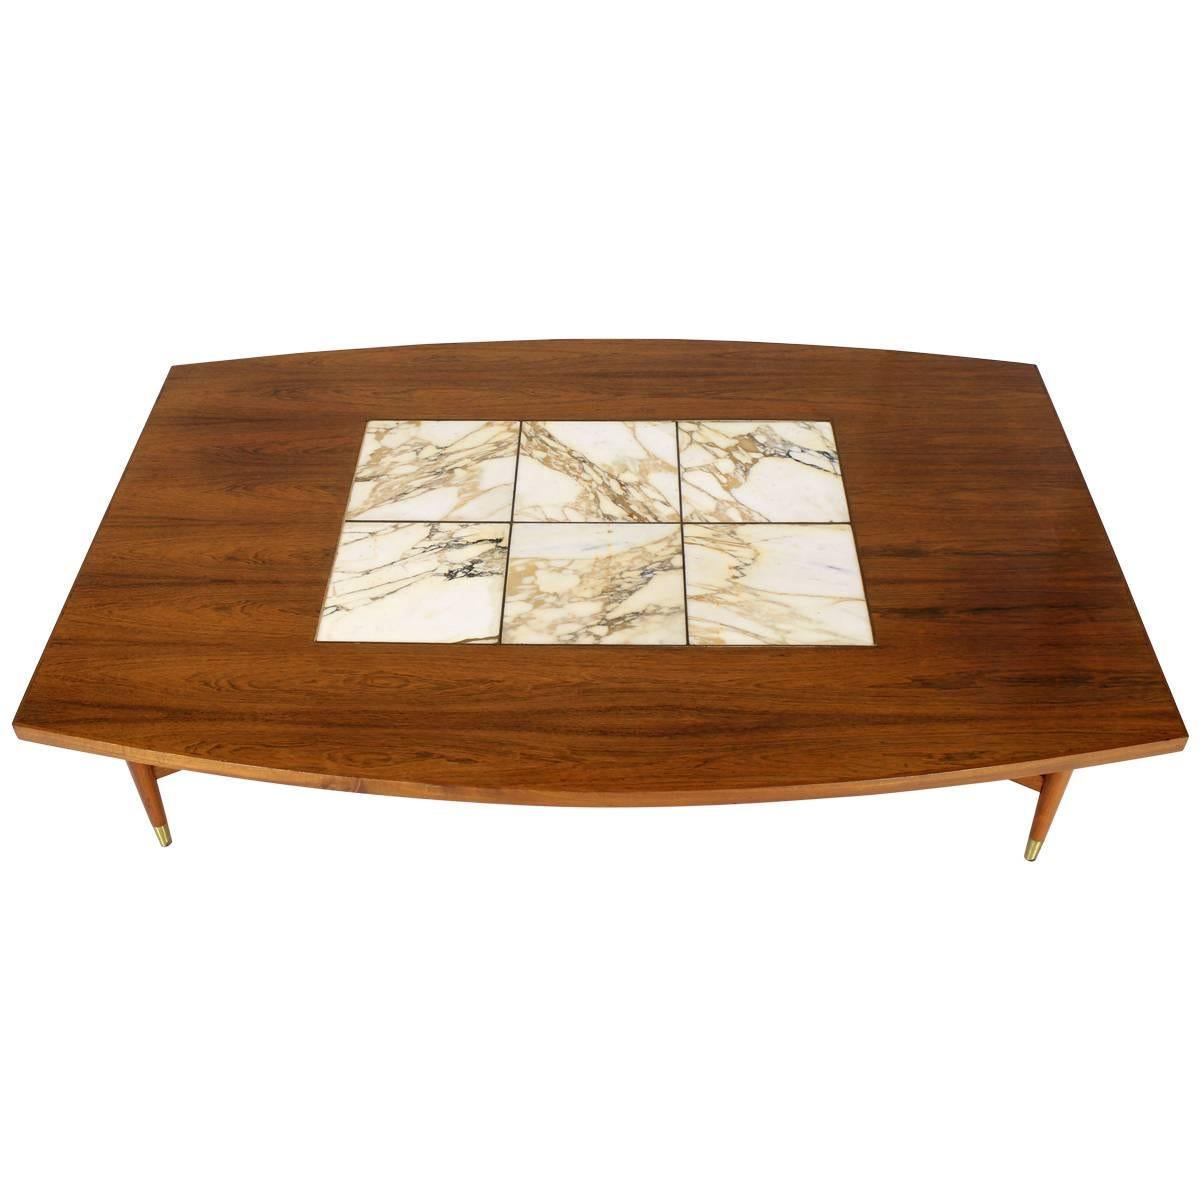 Large Oversize Boat Shape Rosewood & Walnut Coffee Table Brass Inlay Marble Tile For Sale